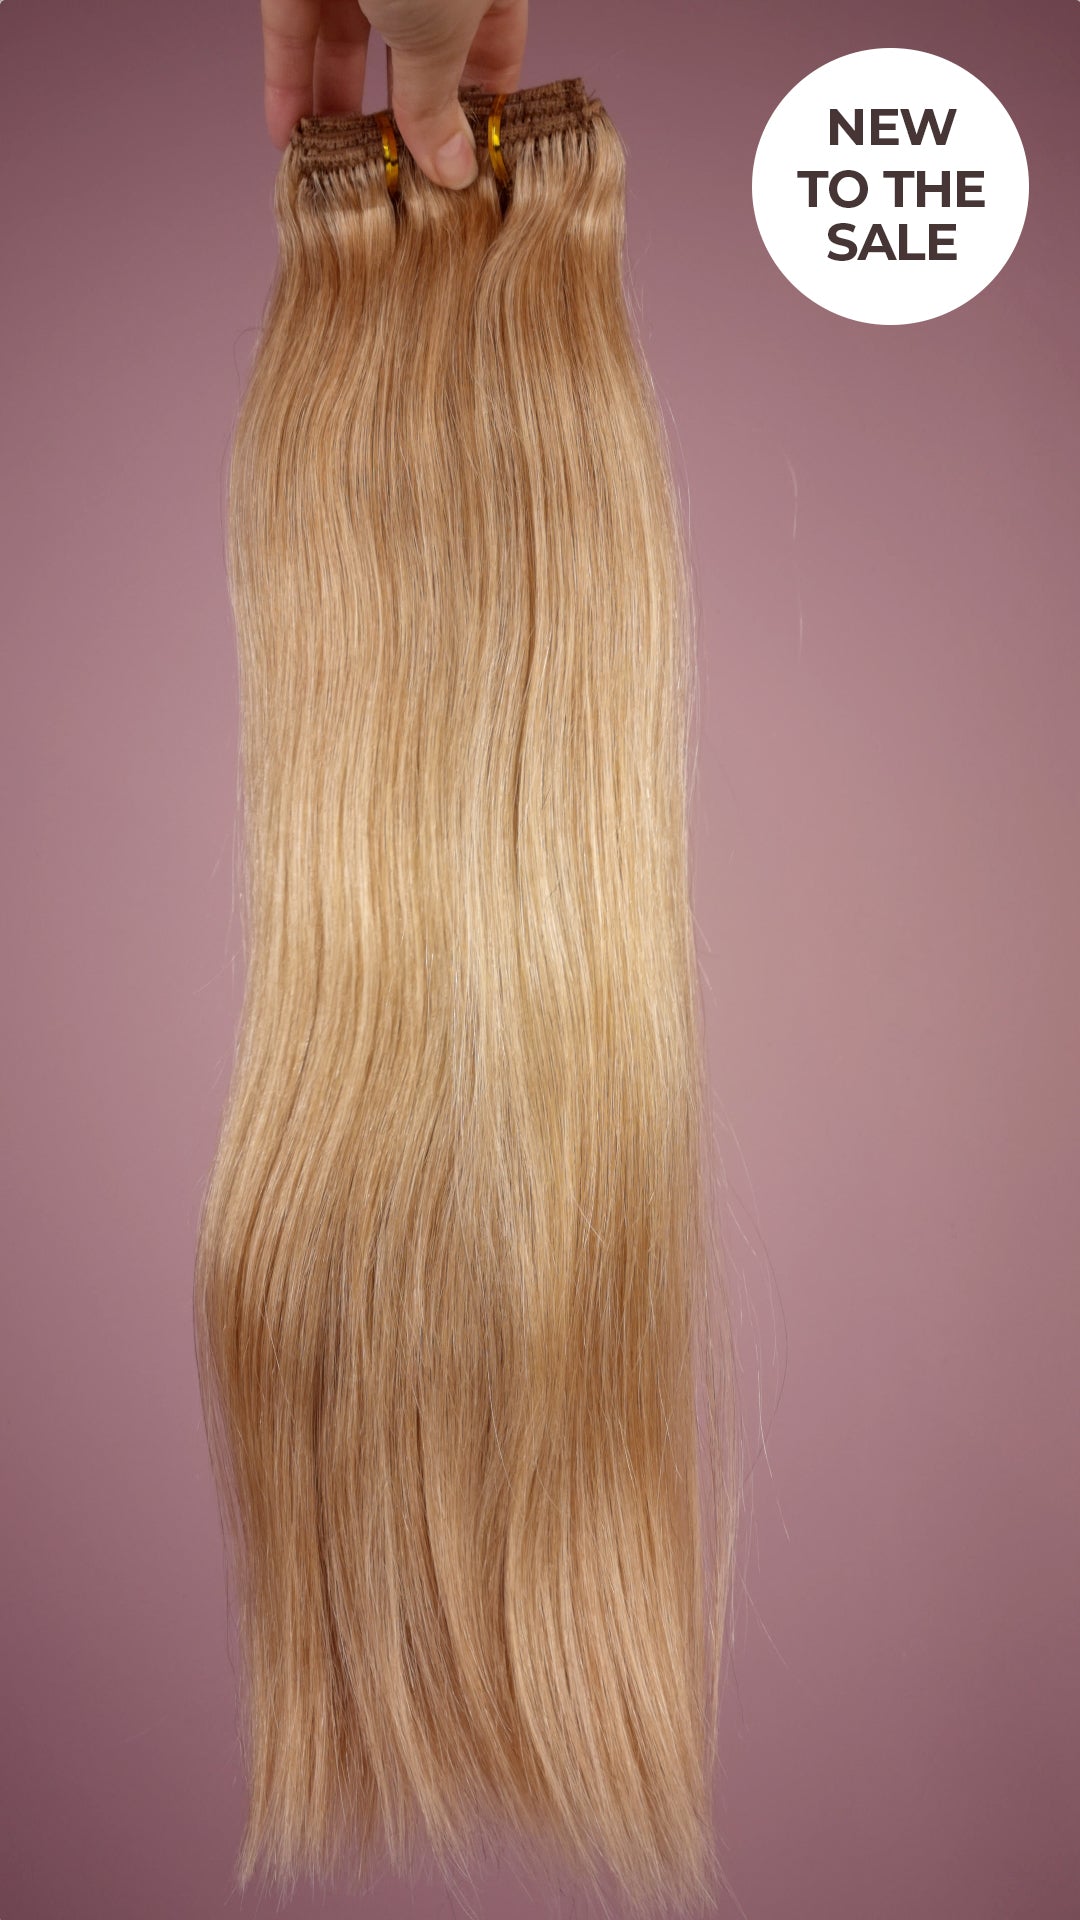 Honing Blonde Clip in Hairextensions (50cm, 160gram)